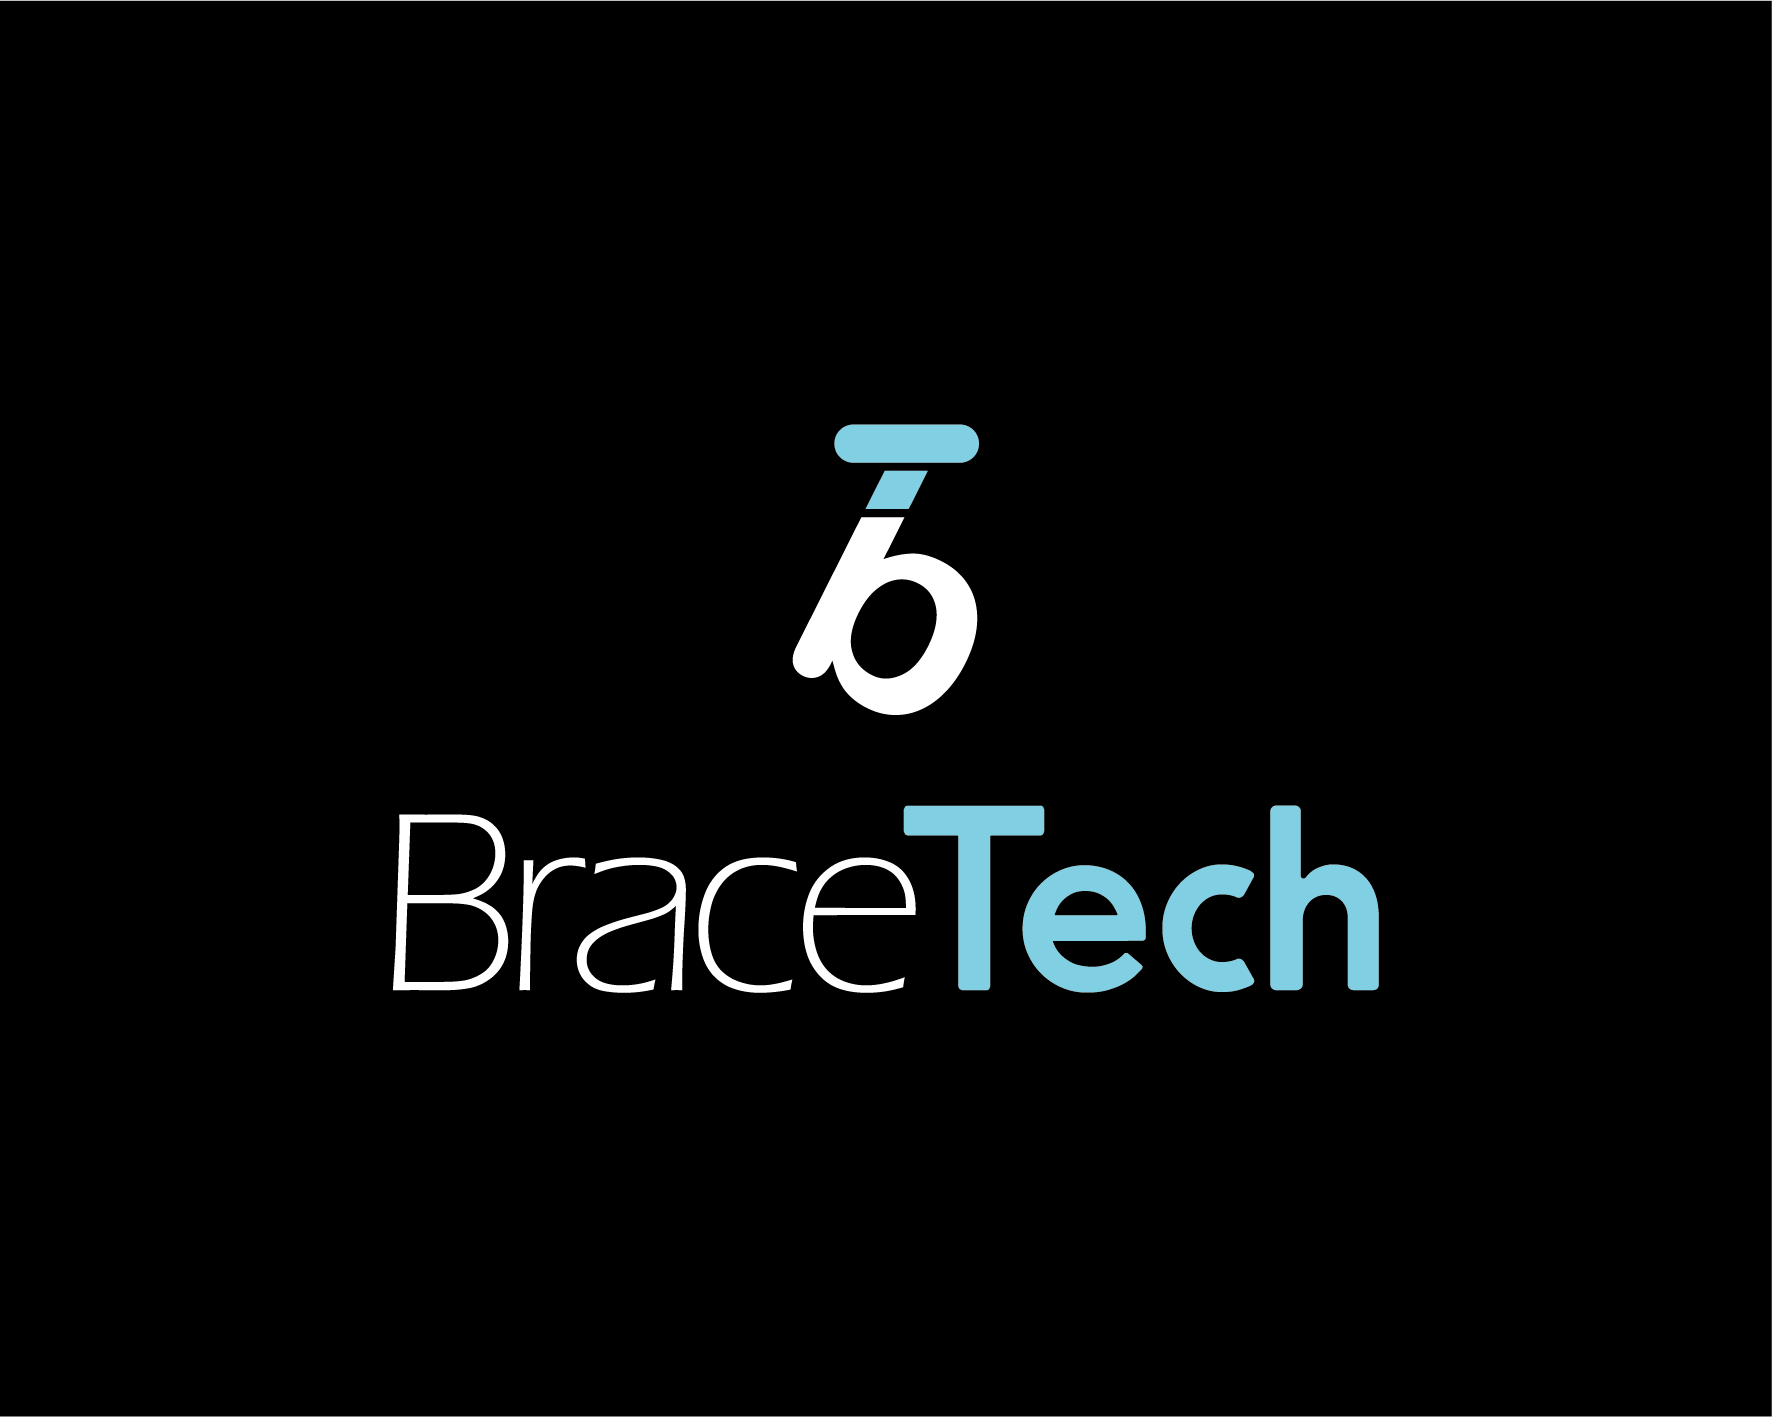 Who are bracetech professional IT computing solutions